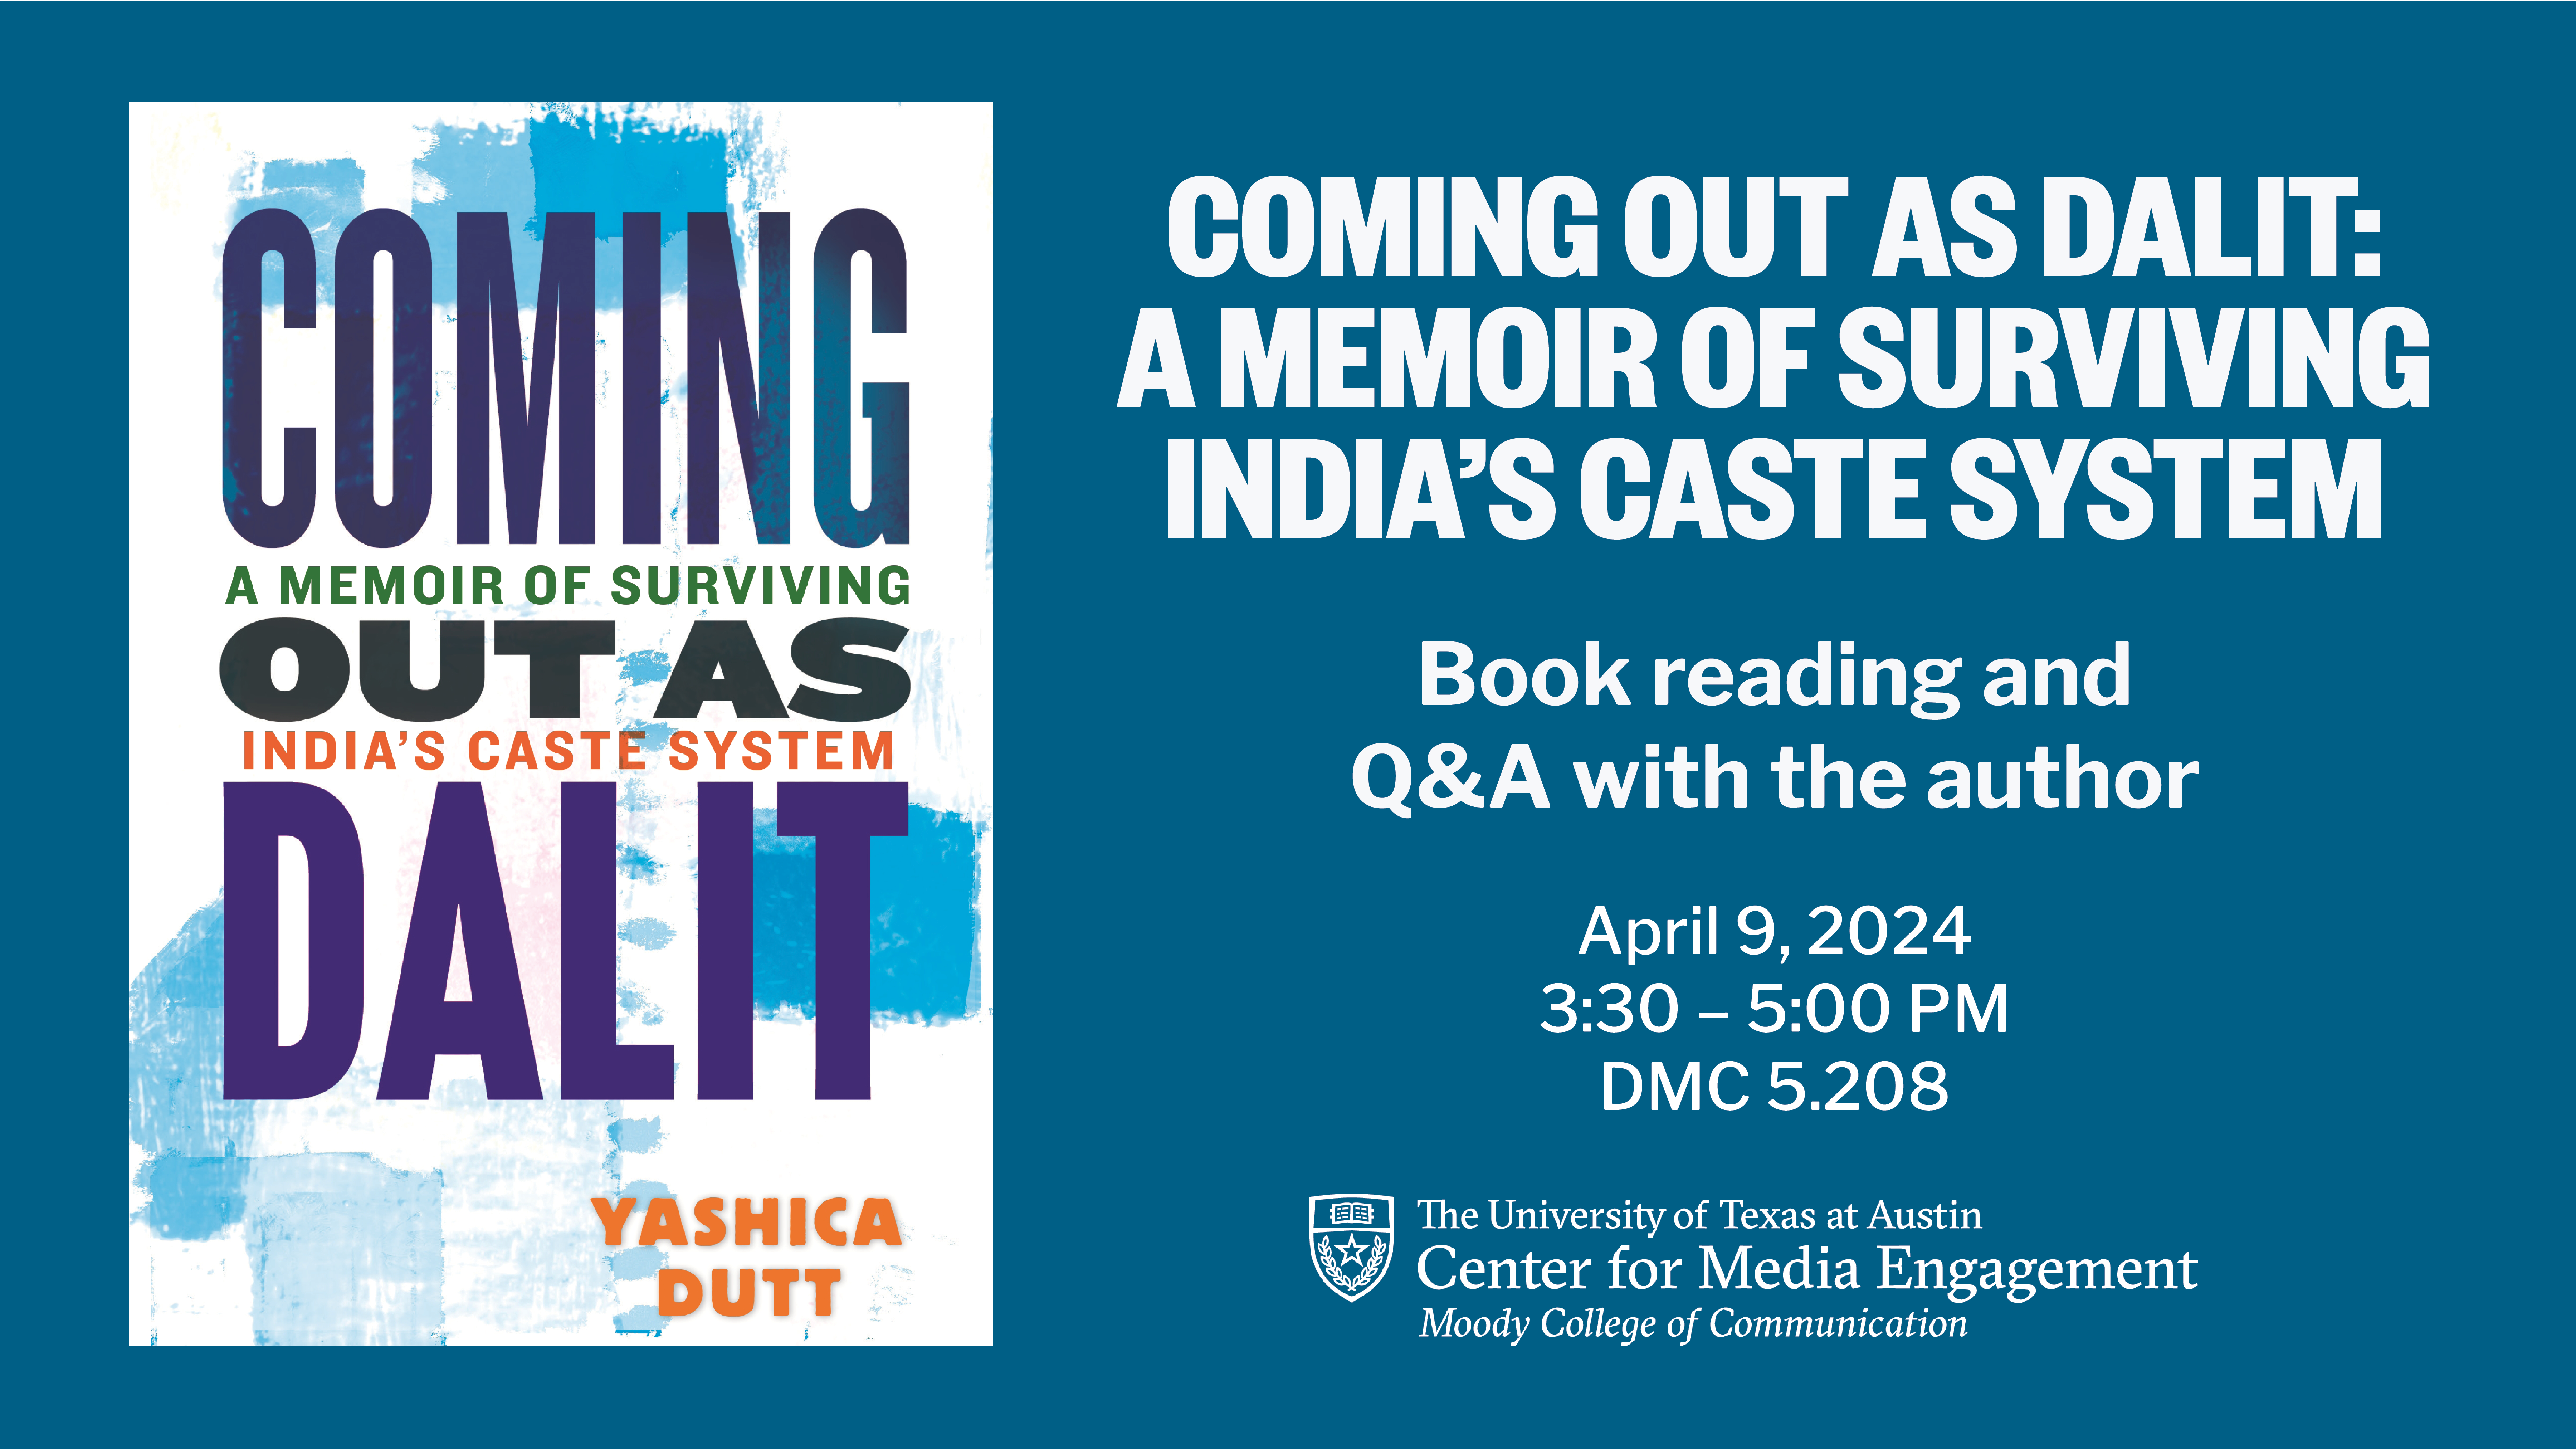 COMING OUT AS DALIT: A MEMOIR OF SURVIVING INDIA’S CASTE SYSTEM. Book reading and Q&A with the author. 